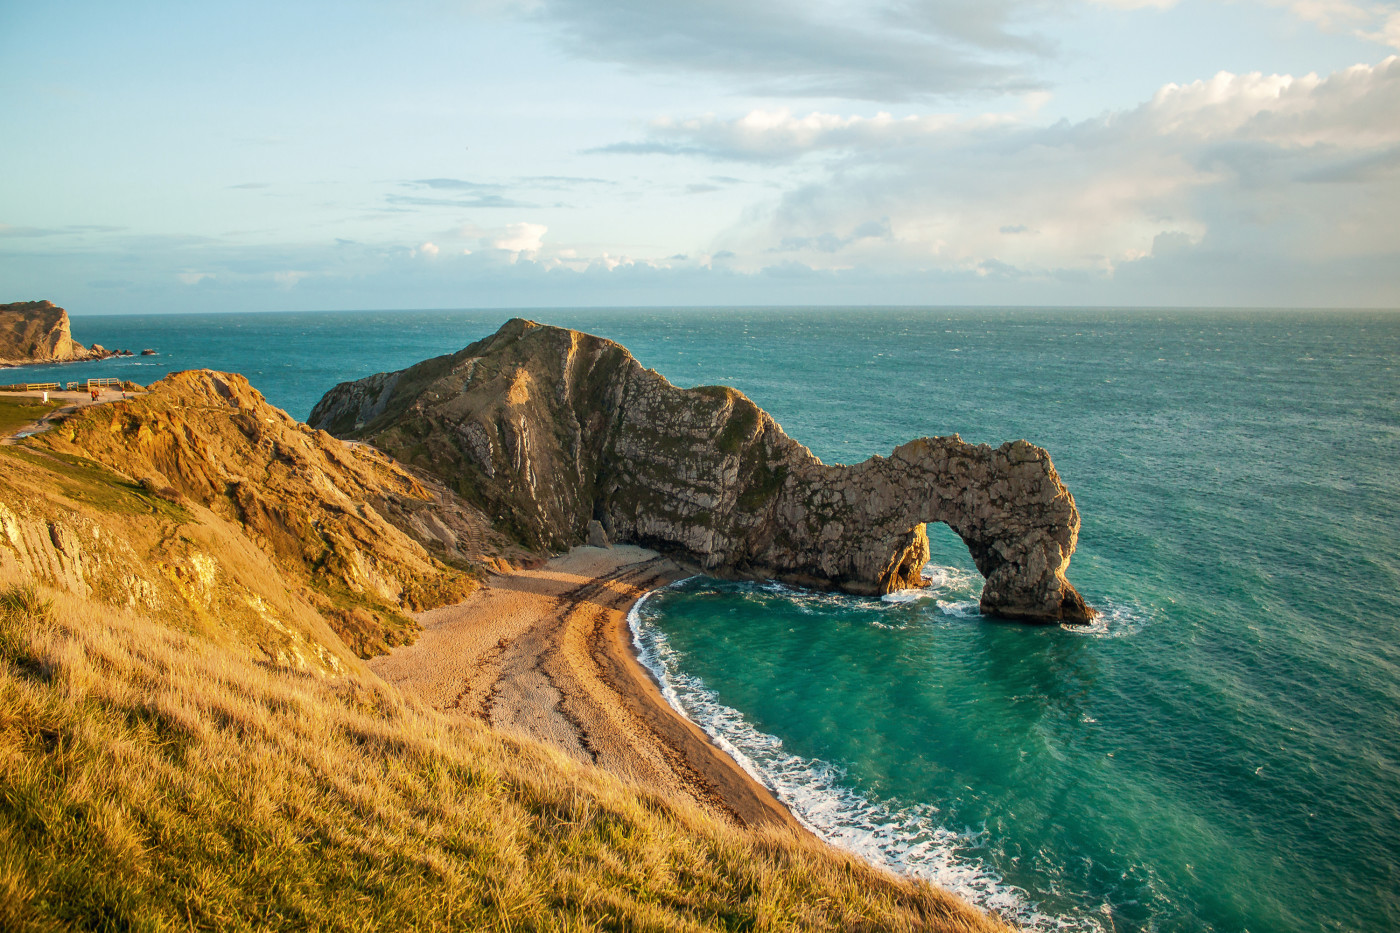 Durdle Door and Lulworth Cove